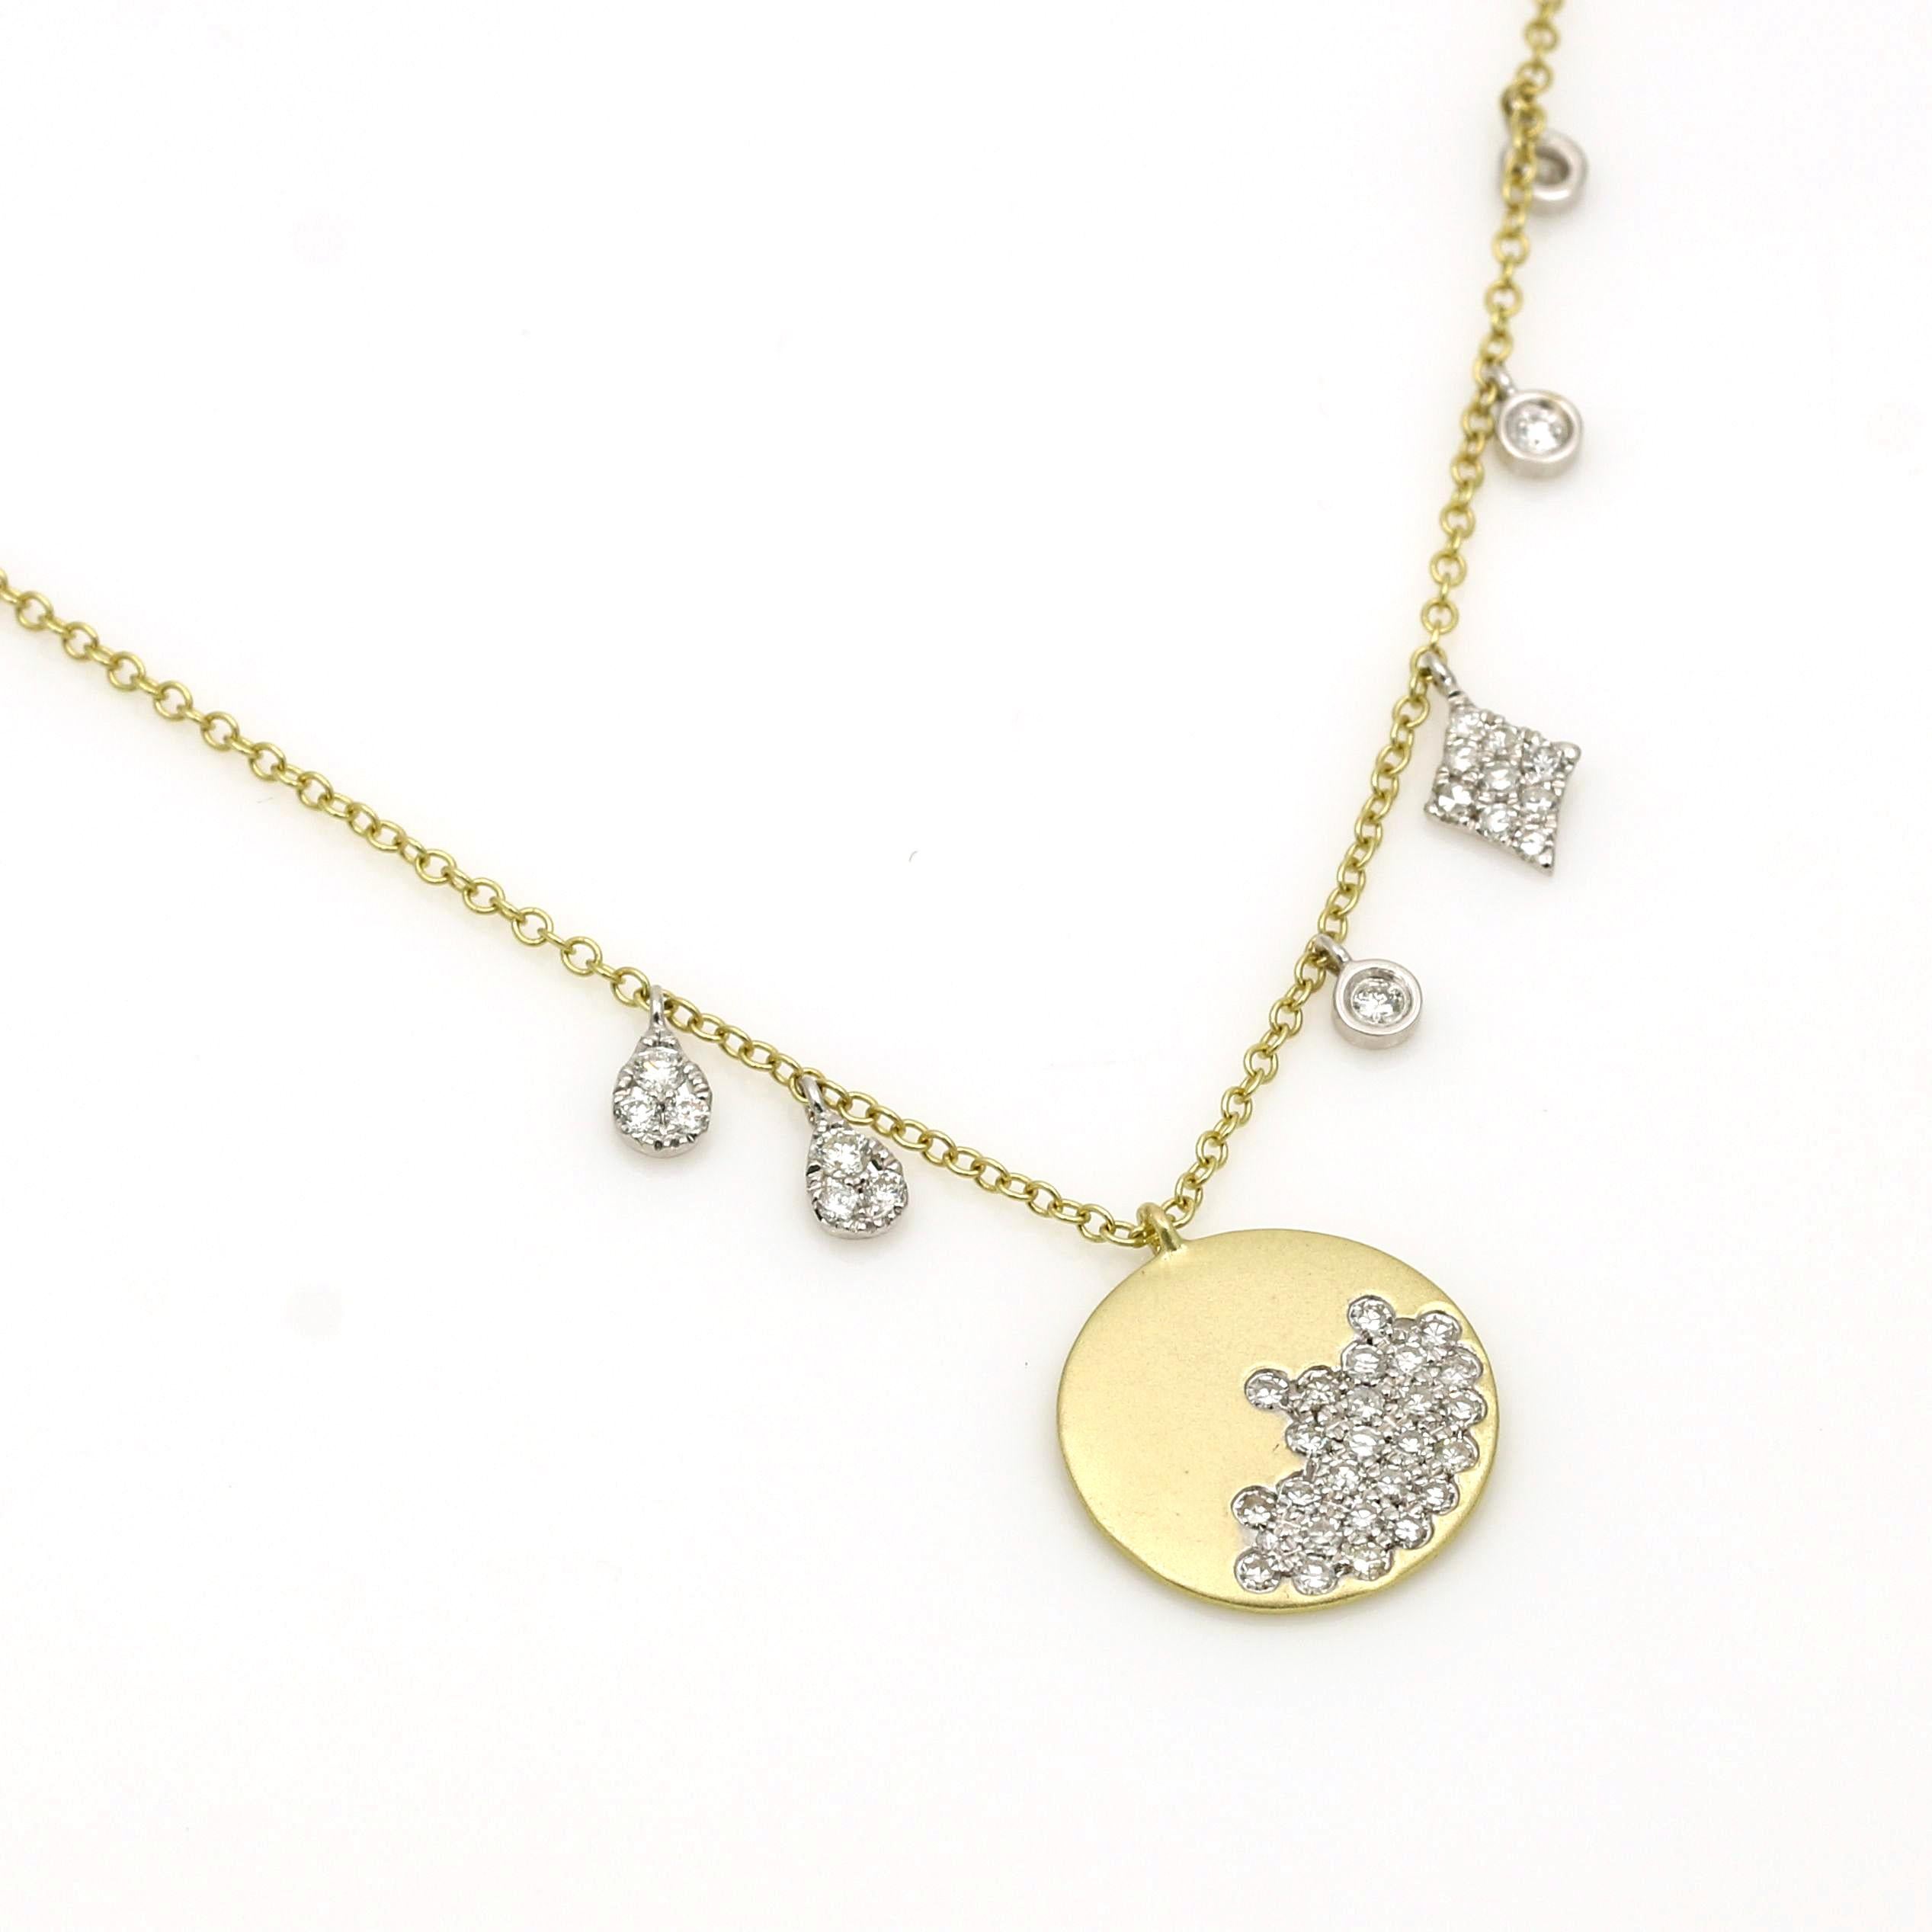 The Meira T Brushed Gold and Diamonds Necklace is a dainty and elegant piece of jewelry perfect for layering. The necklace features a cable chain with an adjustable loop and a lobster clasp, making it easy to wear and adjust to the ideal